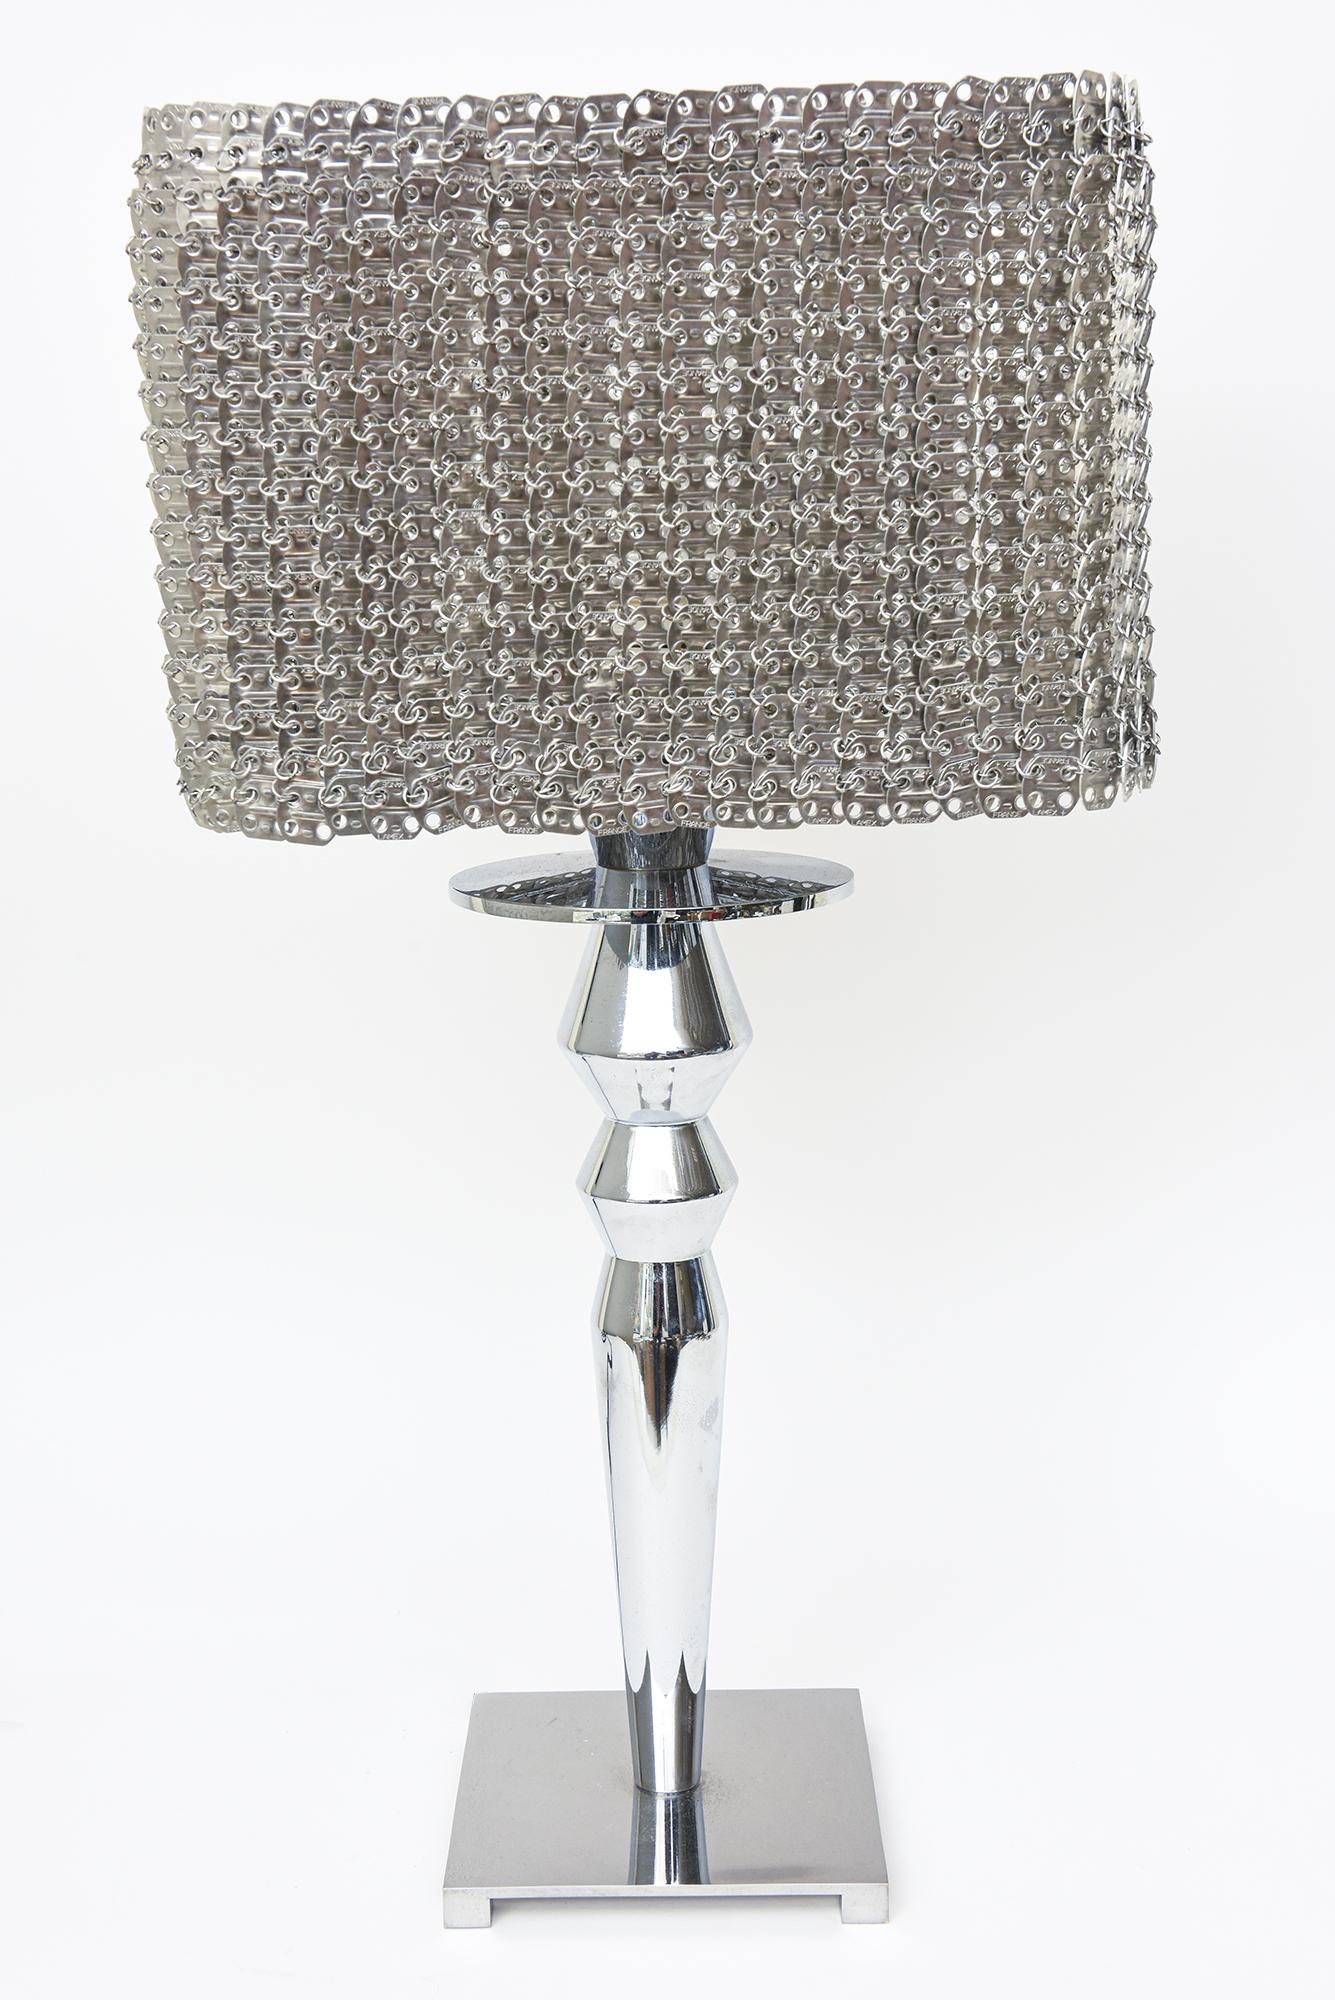 This great Italian Visionnaire Isotta table lamp is aluminum with chain link metal aluminum original chic shade. It has great ambient lighting at night through the chain link shade. It is no longer available through the company or no longer in